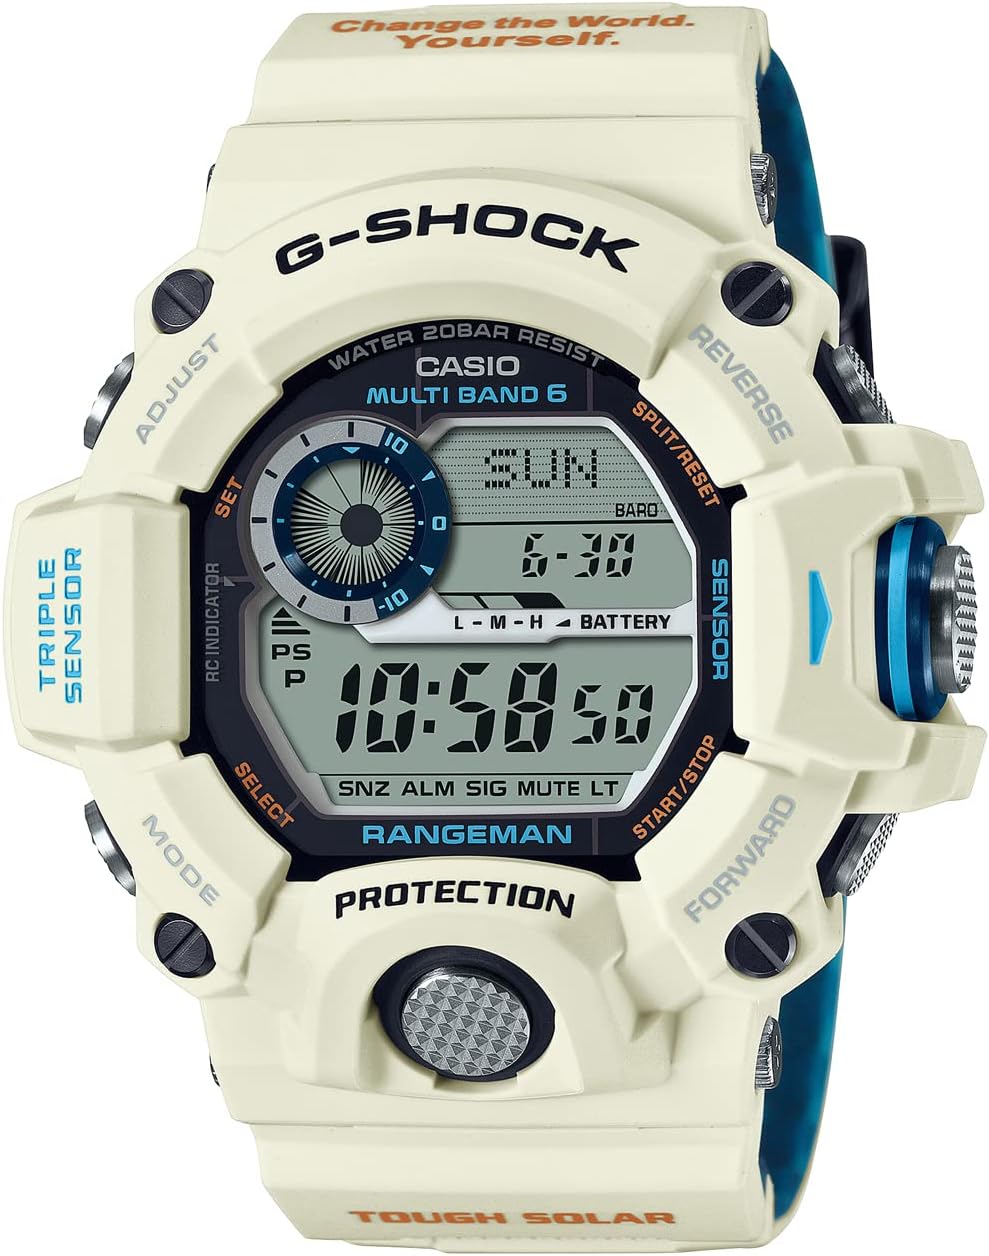 Casio male G-Shock Rangeman GW-9408KJ-7JR Love The Sea and The Earth Limited Edition (Japan Domestic Genuine Products)